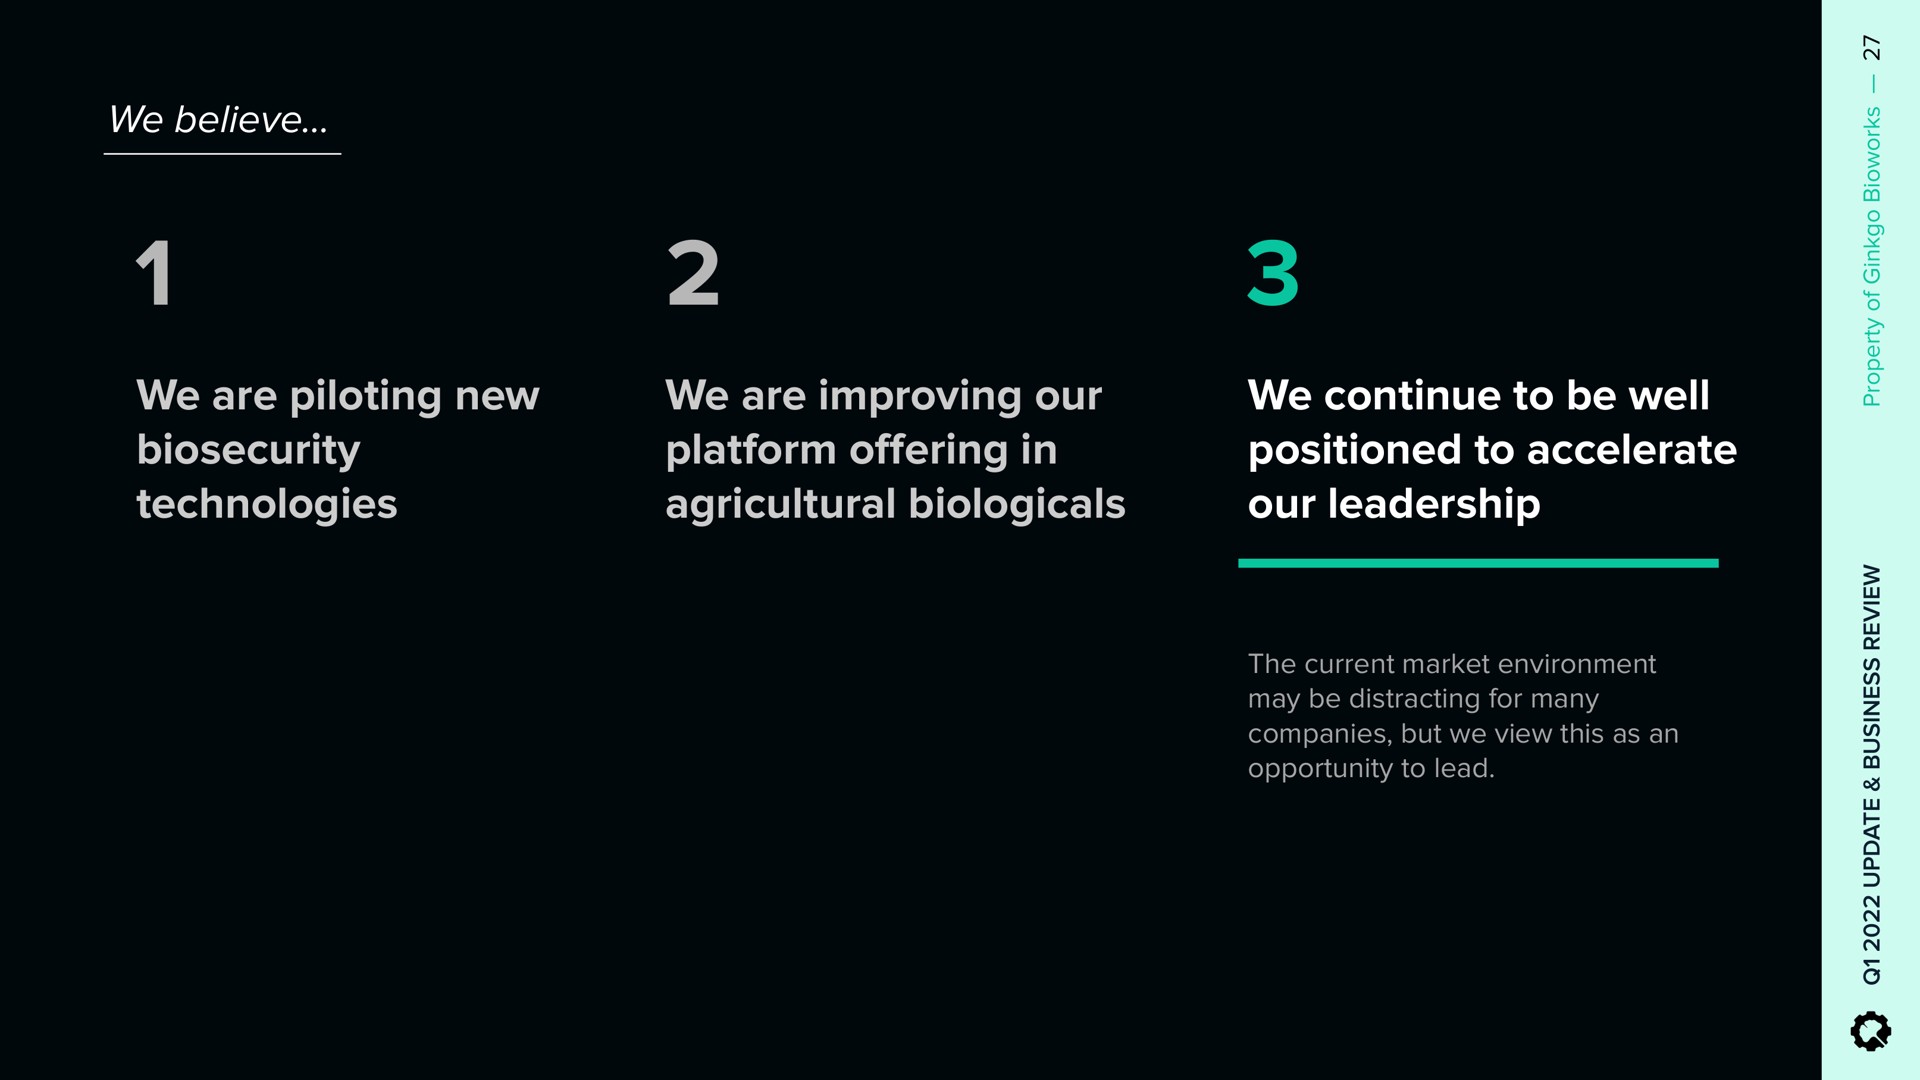 we are piloting new technologies we are improving our platform in agricultural we continue to be well positioned to accelerate our leadership i offering | Ginkgo